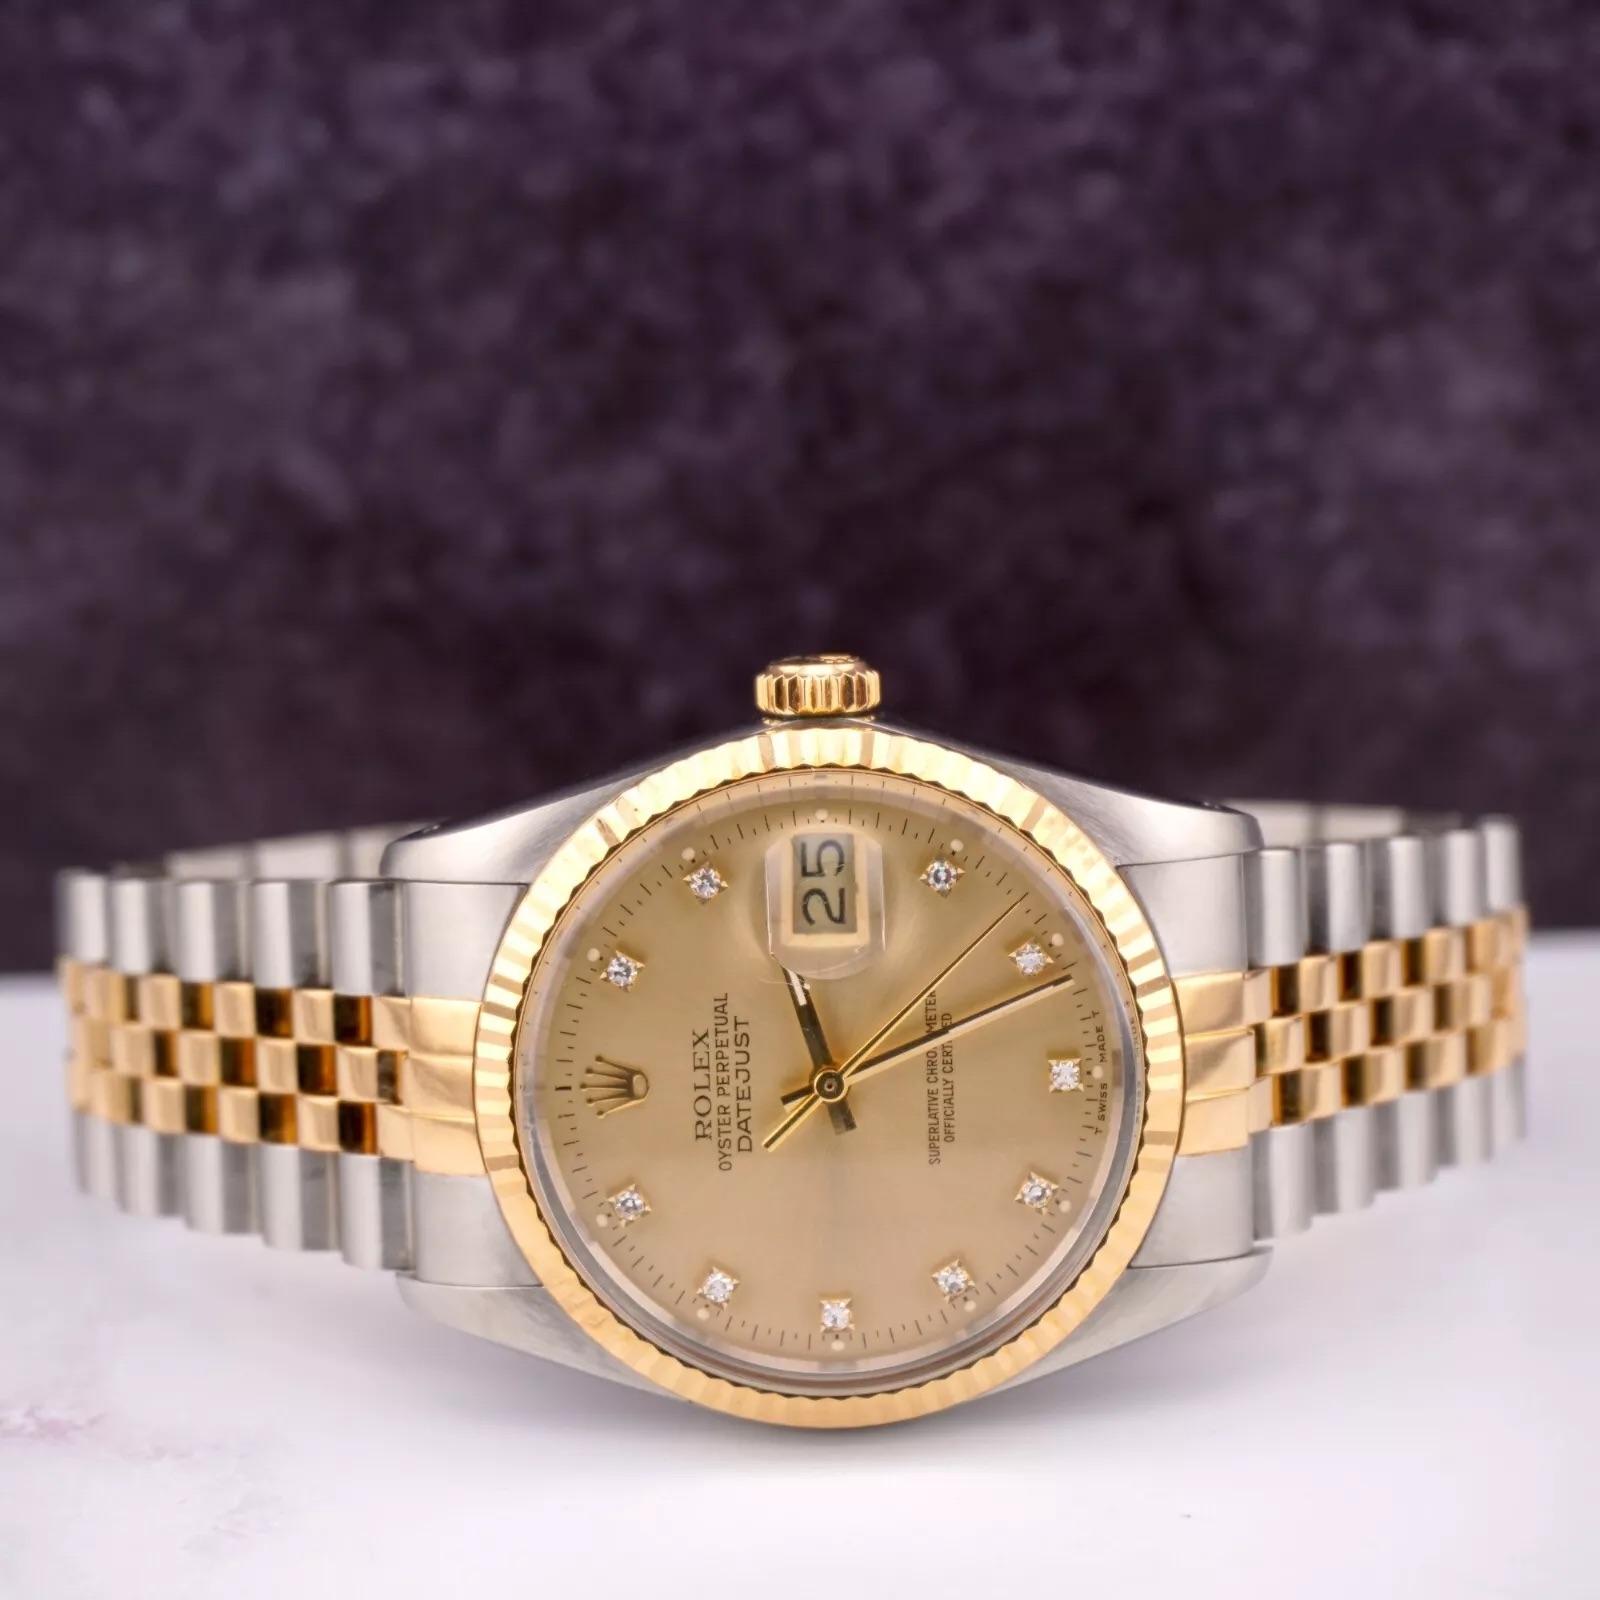 Rolex Datejust 36mm Watch

Pre-owned w/ Original Box & Card
100% Authentic Authenticity Card
Condition - (Great Condition) - See Pics
Watch Reference - 16013
Model - Datejust
Dial Color - Yellow Gold
Material - 18k Yellow Gold/Stainless Steel
Watch